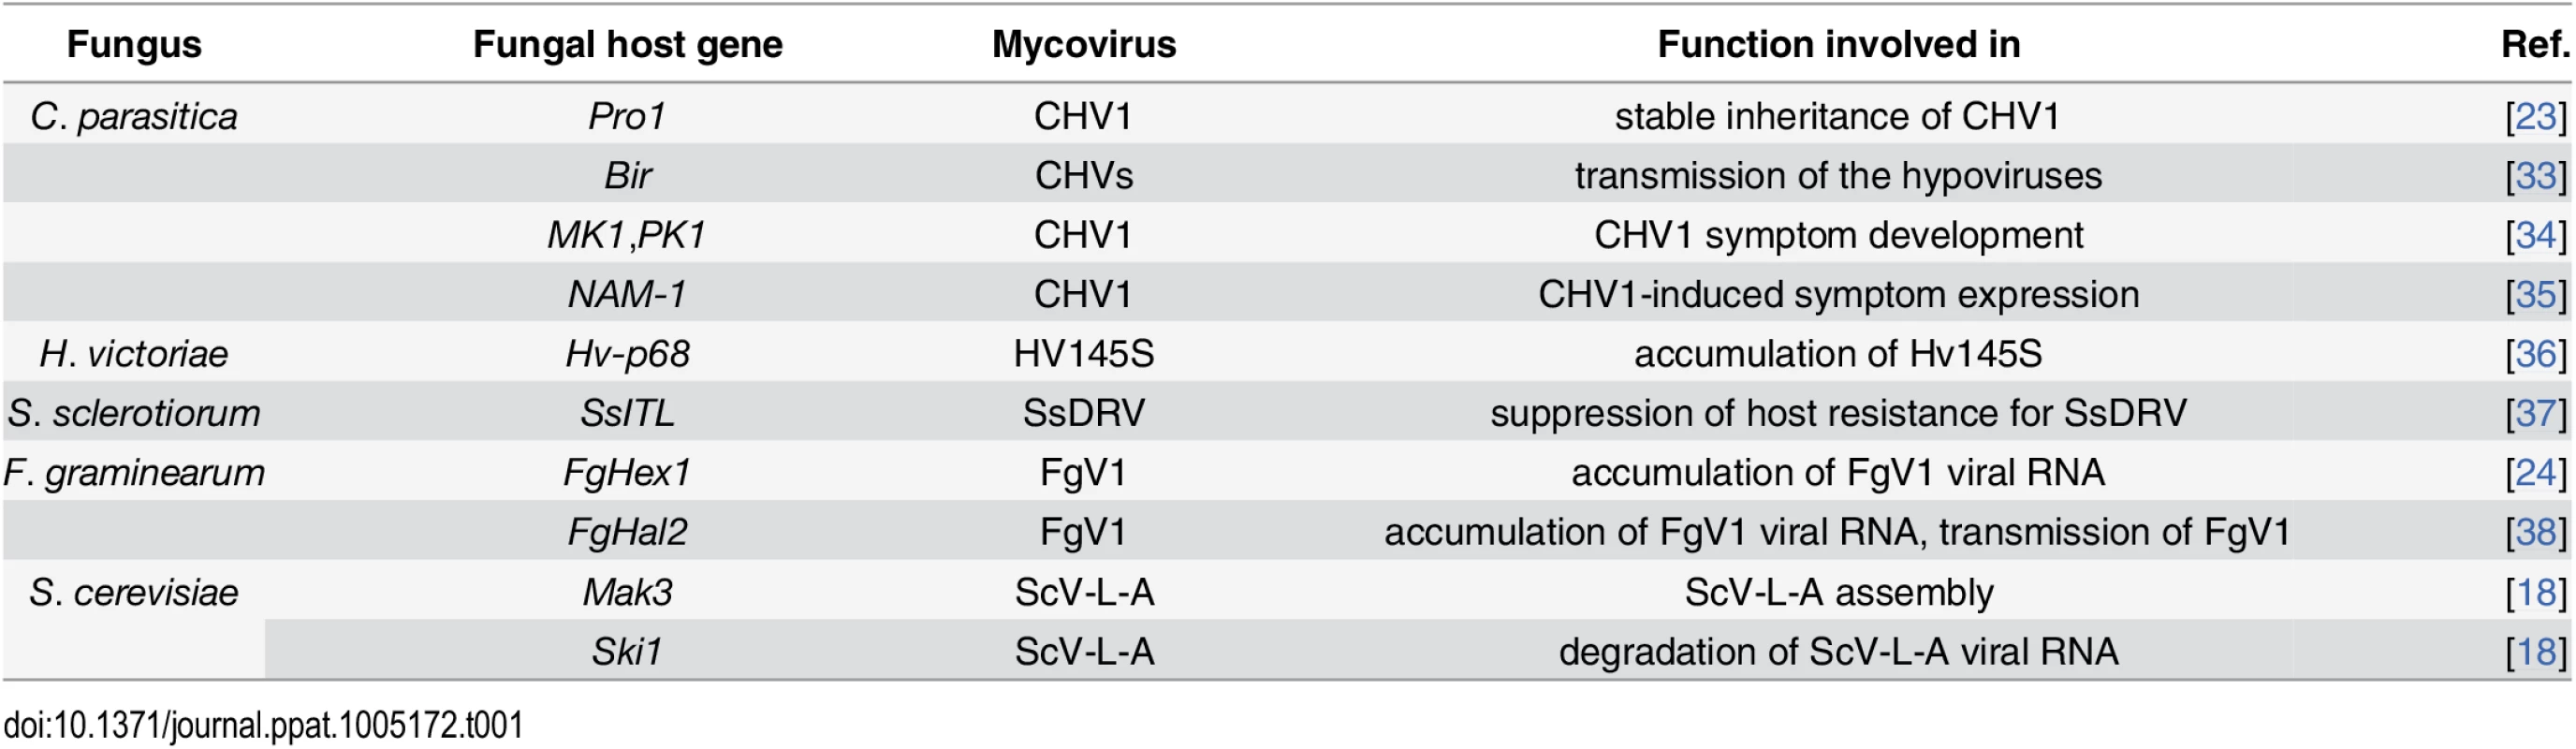 Host genes involved in interactions between mycoviruses and host fungi.